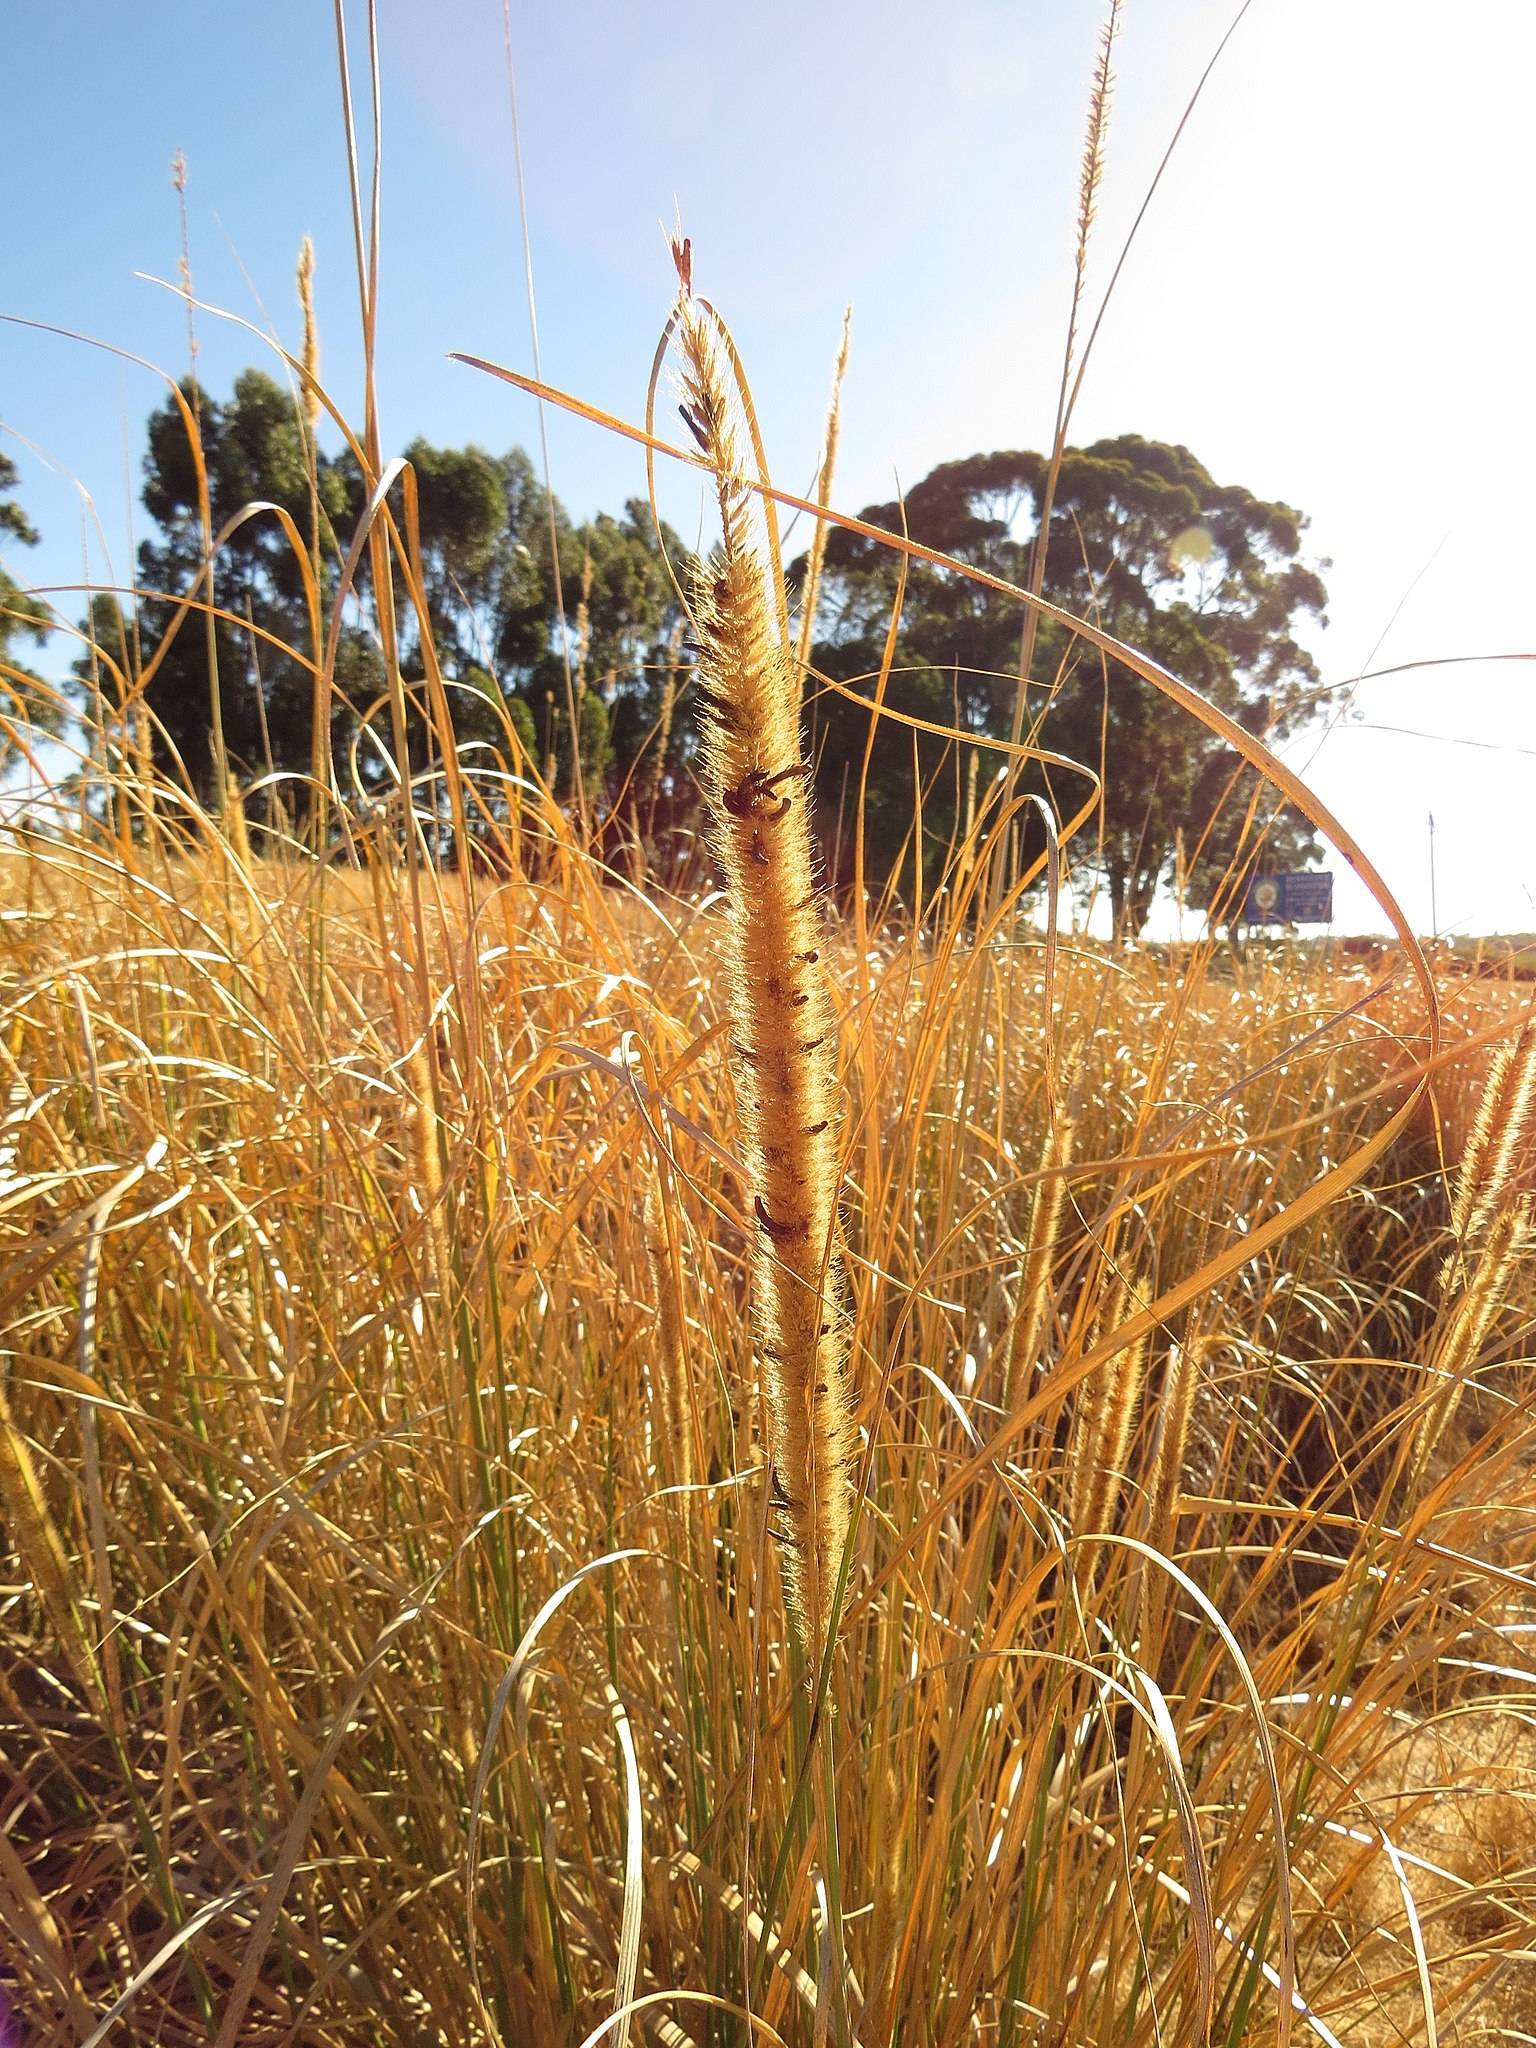 gold-orange spikelets with gold-orange foliage and stems